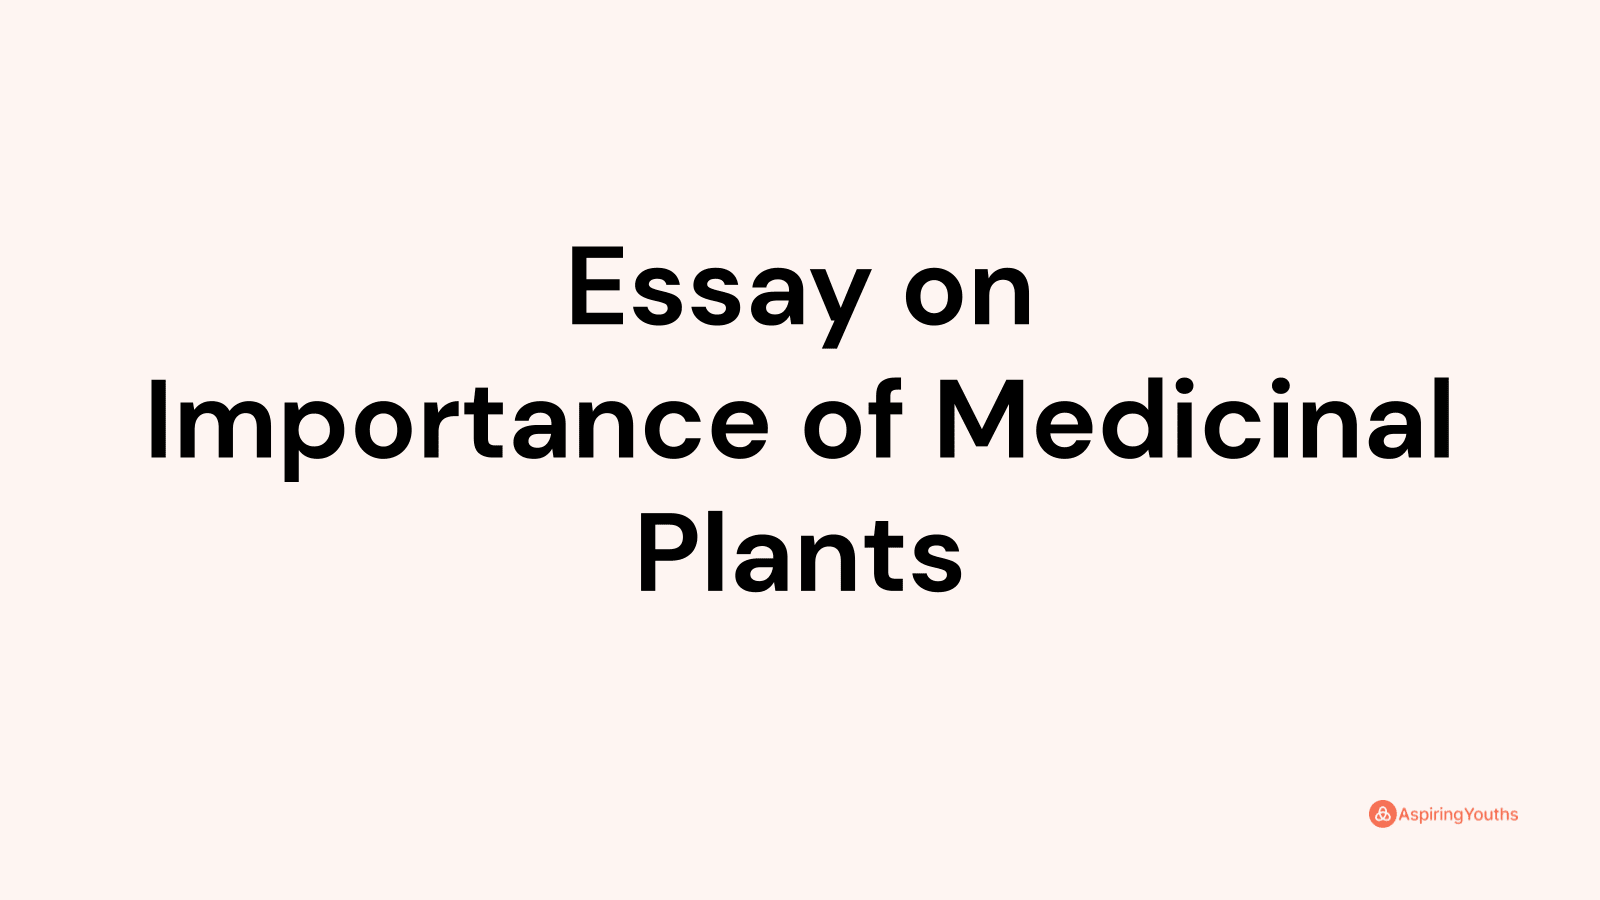 essay on medicinal plants for class 3